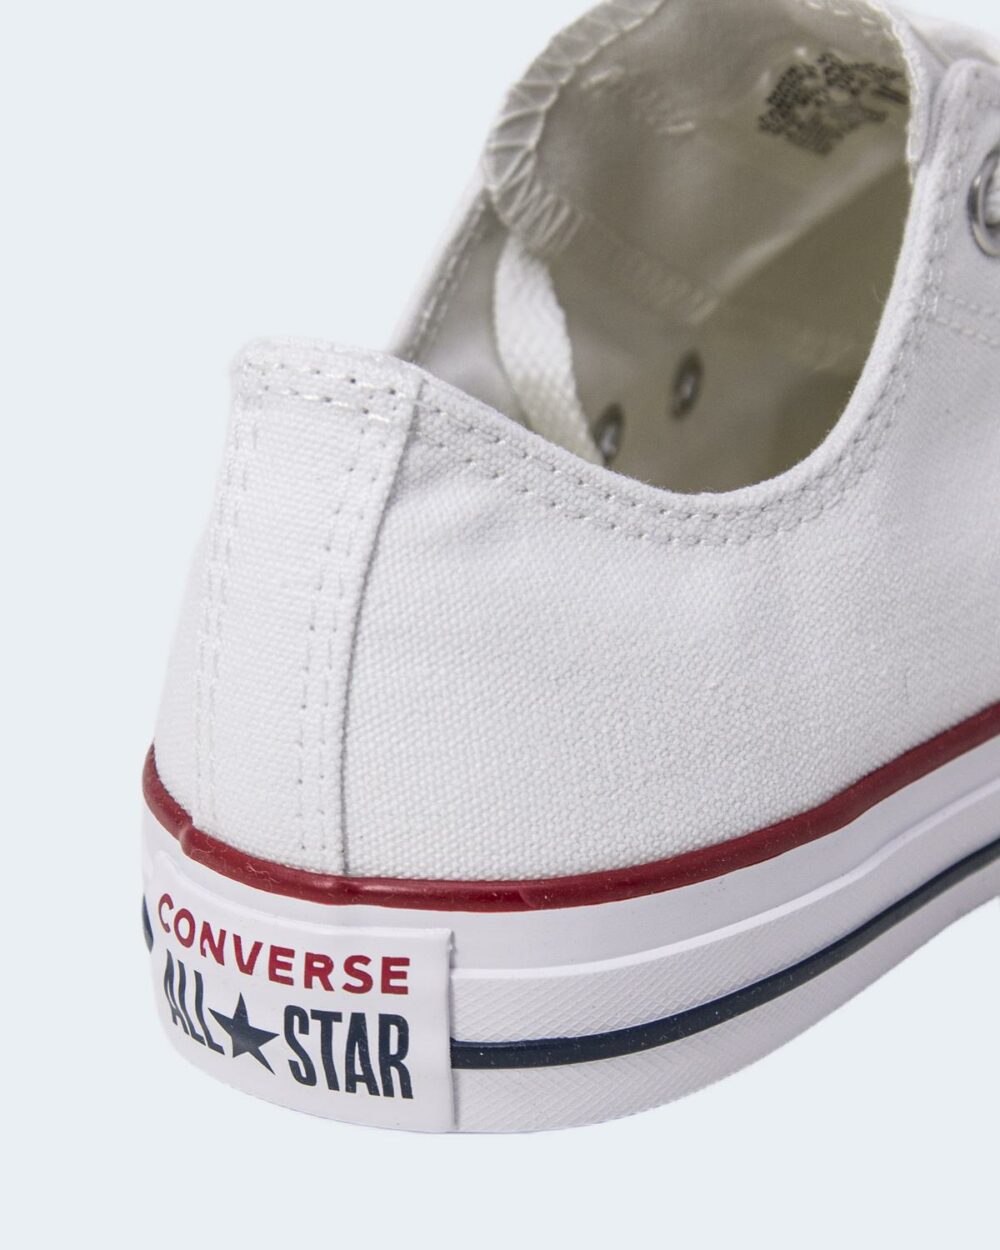 Sneakers Converse ALL STAR OX Bianco - Foto 4